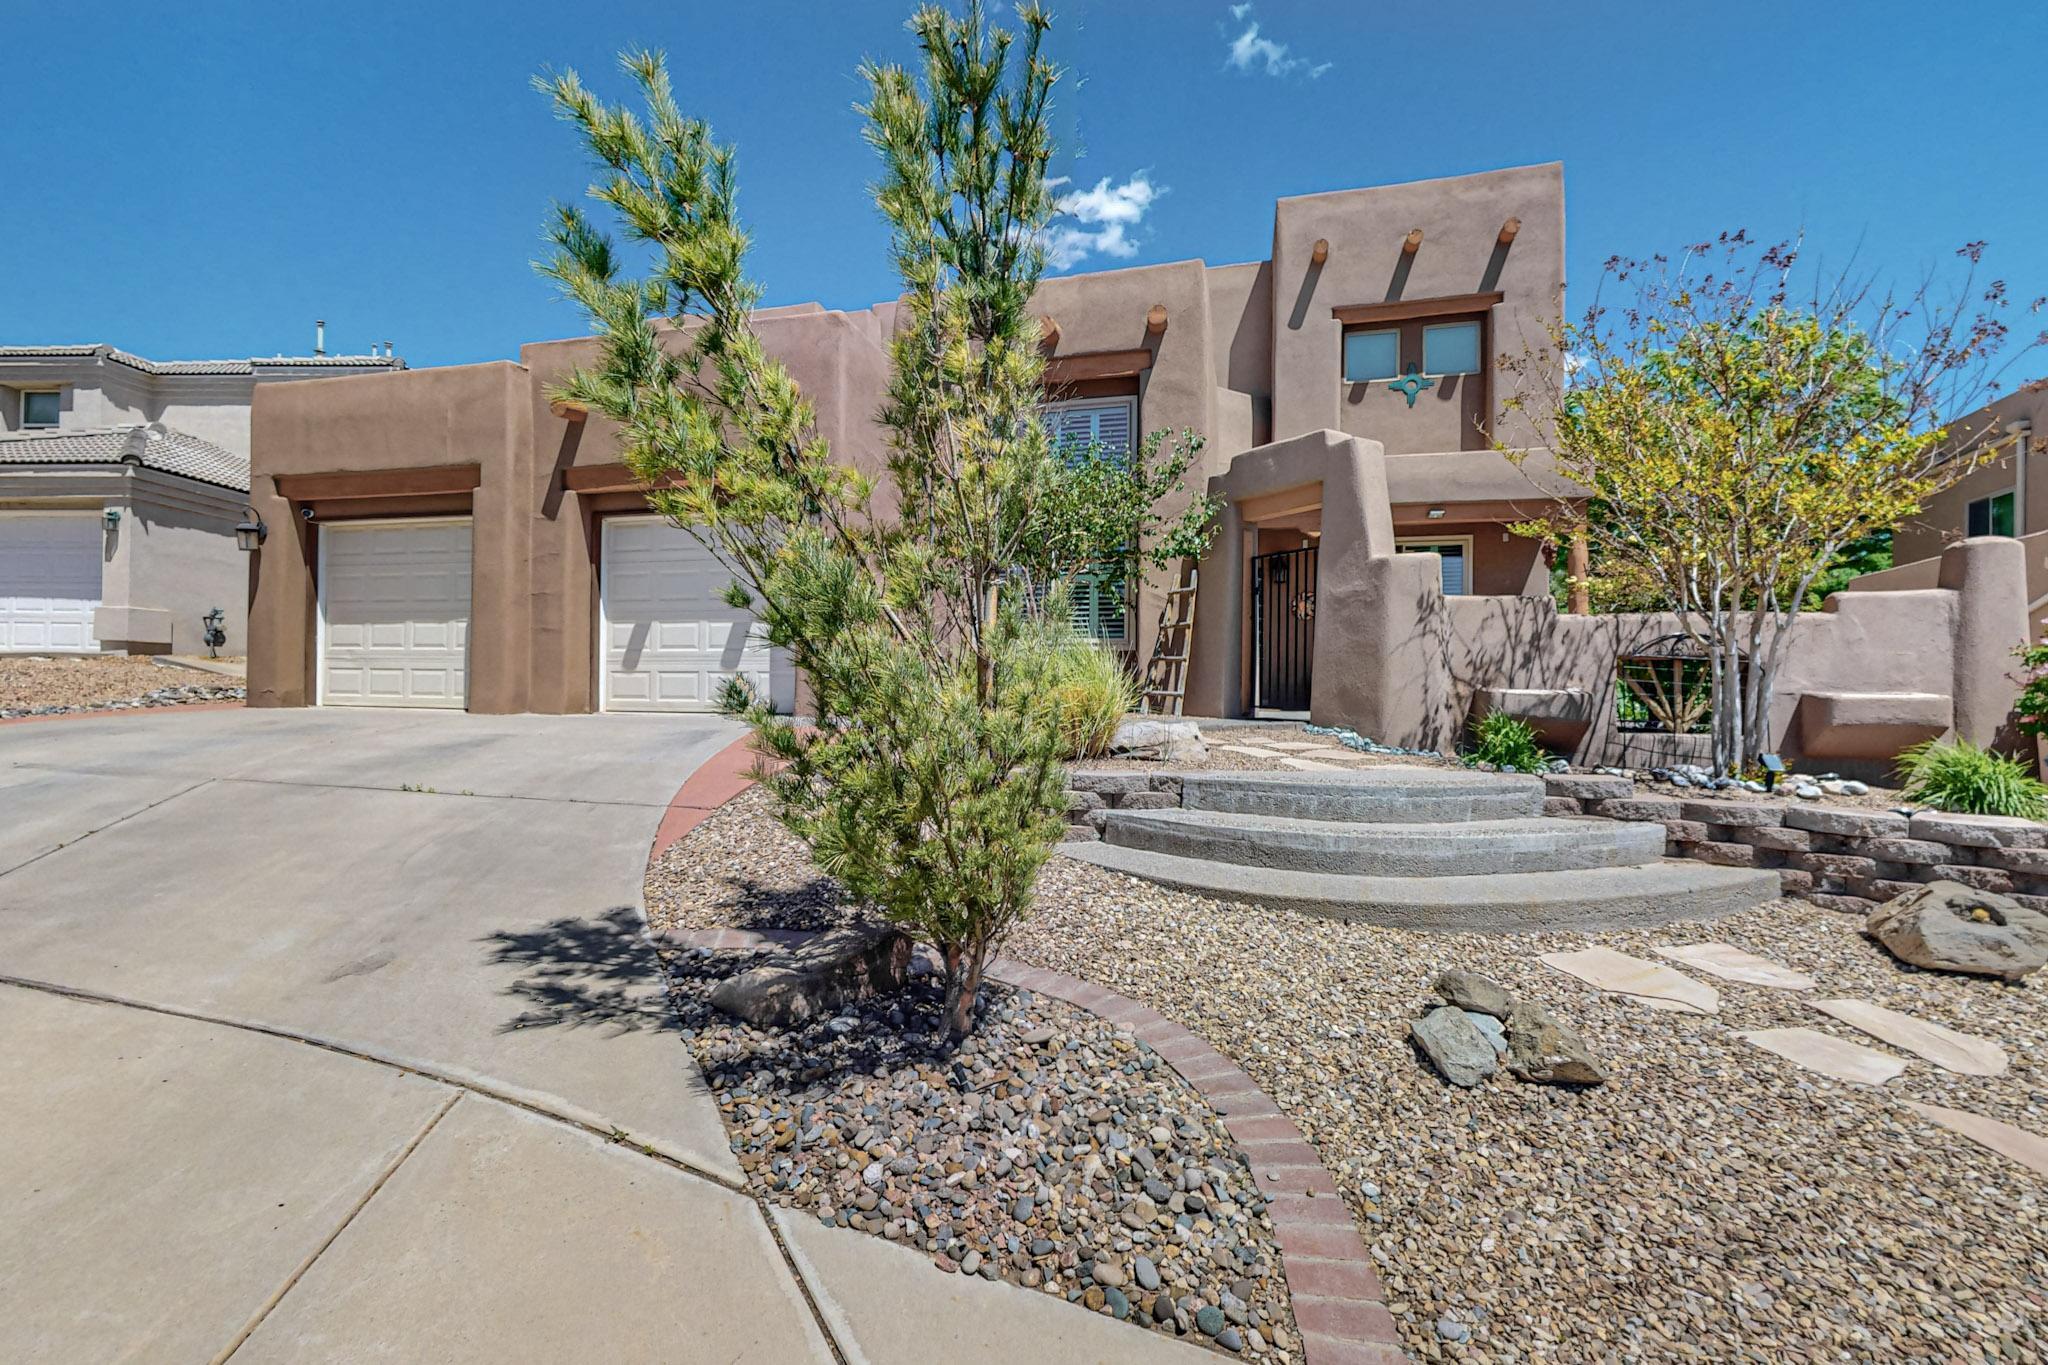 4308 Dry Creek Place NW, Albuquerque, New Mexico 87114, 3 Bedrooms Bedrooms, ,3 BathroomsBathrooms,Residential,For Sale,4308 Dry Creek Place NW,1061828